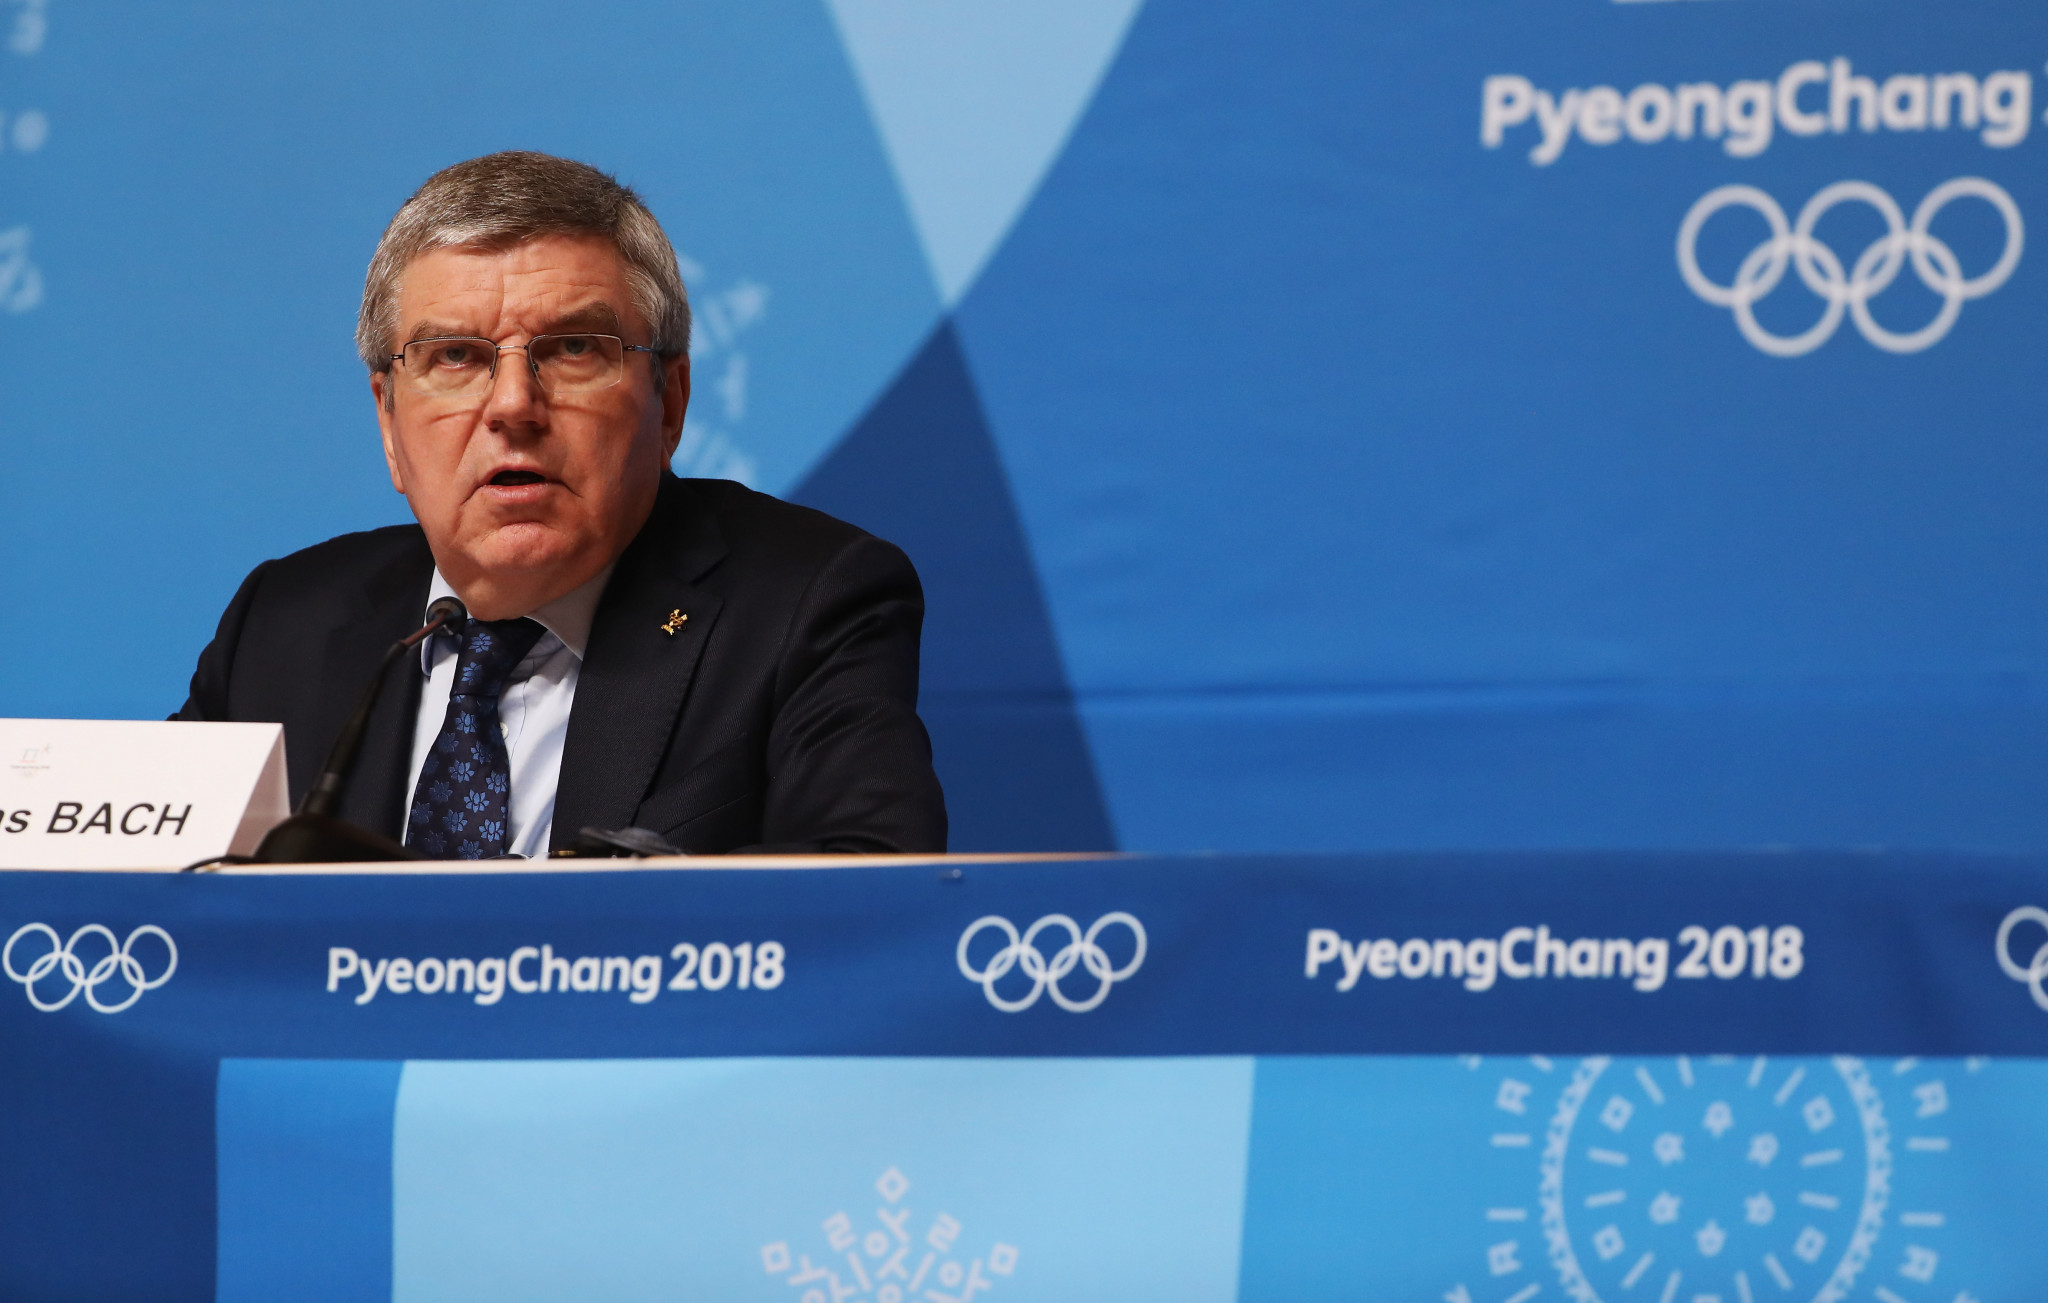 IOC President Thomas Bach raised the suggested boxing could be removed from Tokyo 2020 should issues not be fixed ©Getty Images